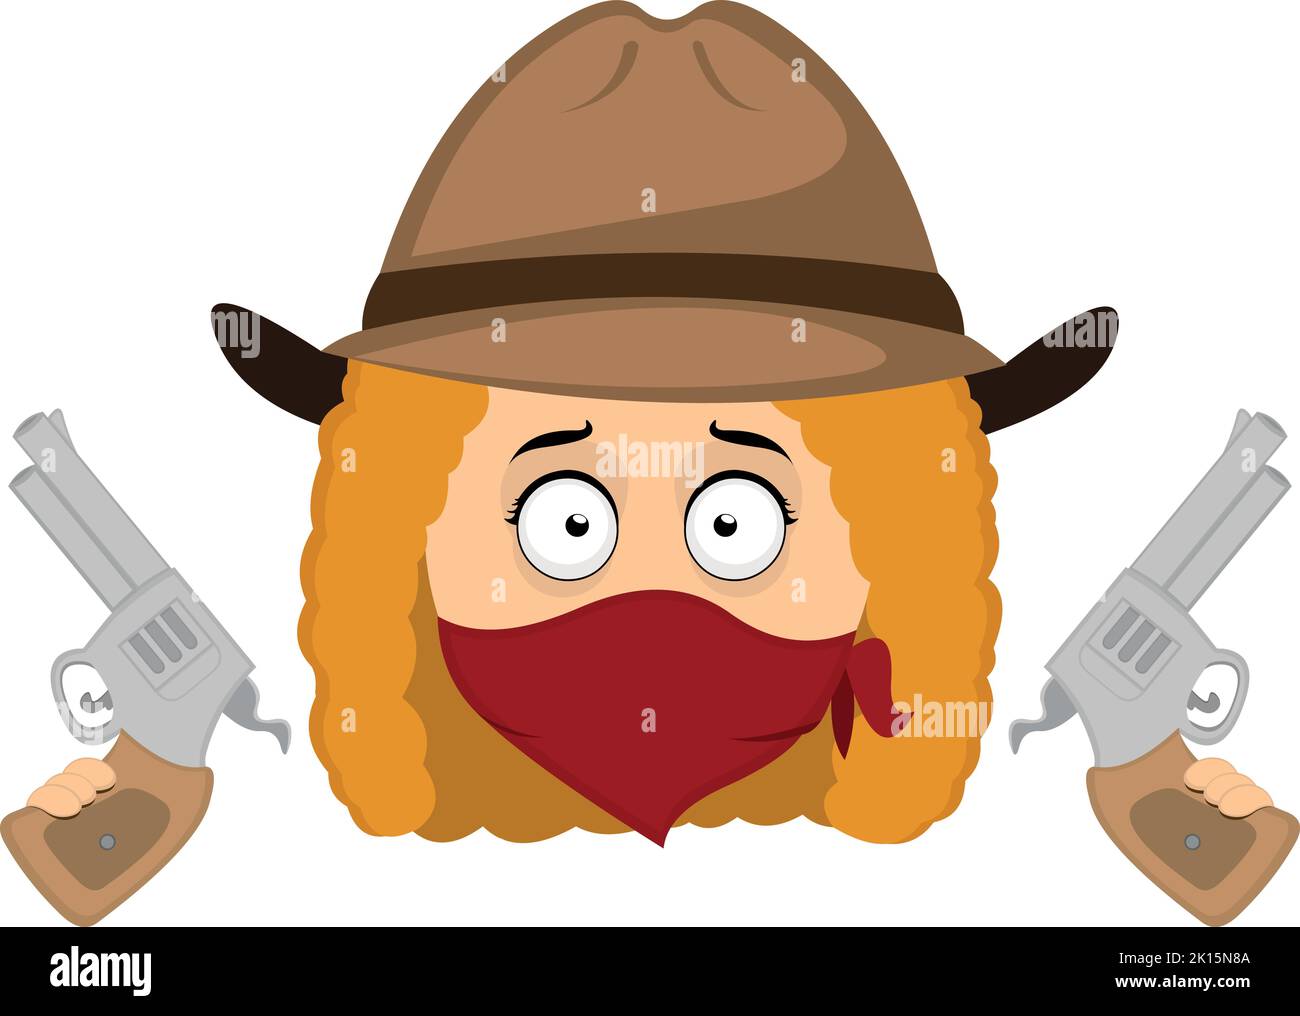 Vector illustration of the emoticon of a woman cowboy bandit from the far west, with a hat, a scarf covering his face and weapons in his hands Stock Vector